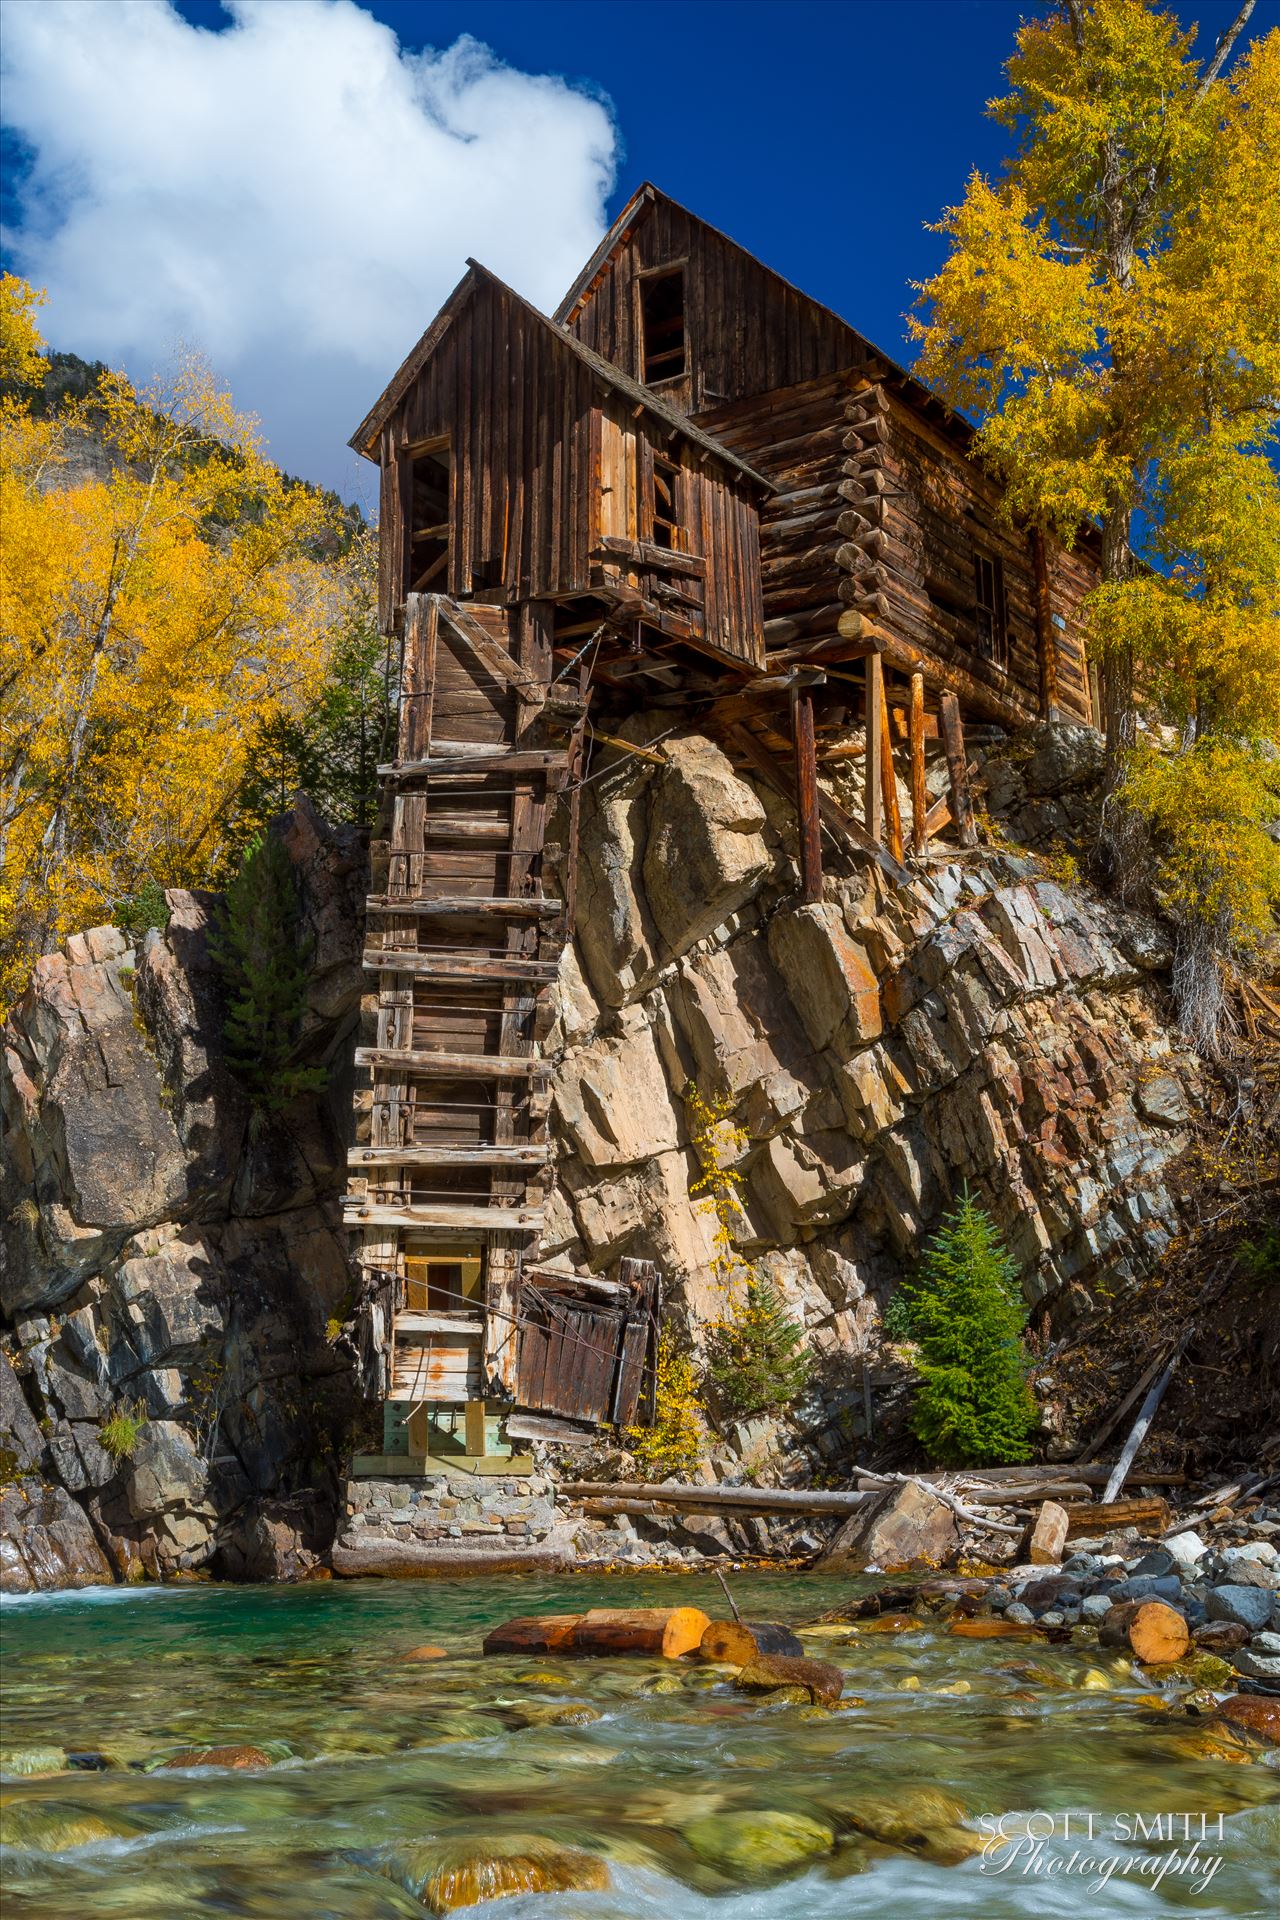 Crystal Mill, Colorado 06 The Crystal Mill, or the Old Mill is an 1892 wooden powerhouse located on an outcrop above the Crystal River in Crystal, Colorado by Scott Smith Photos